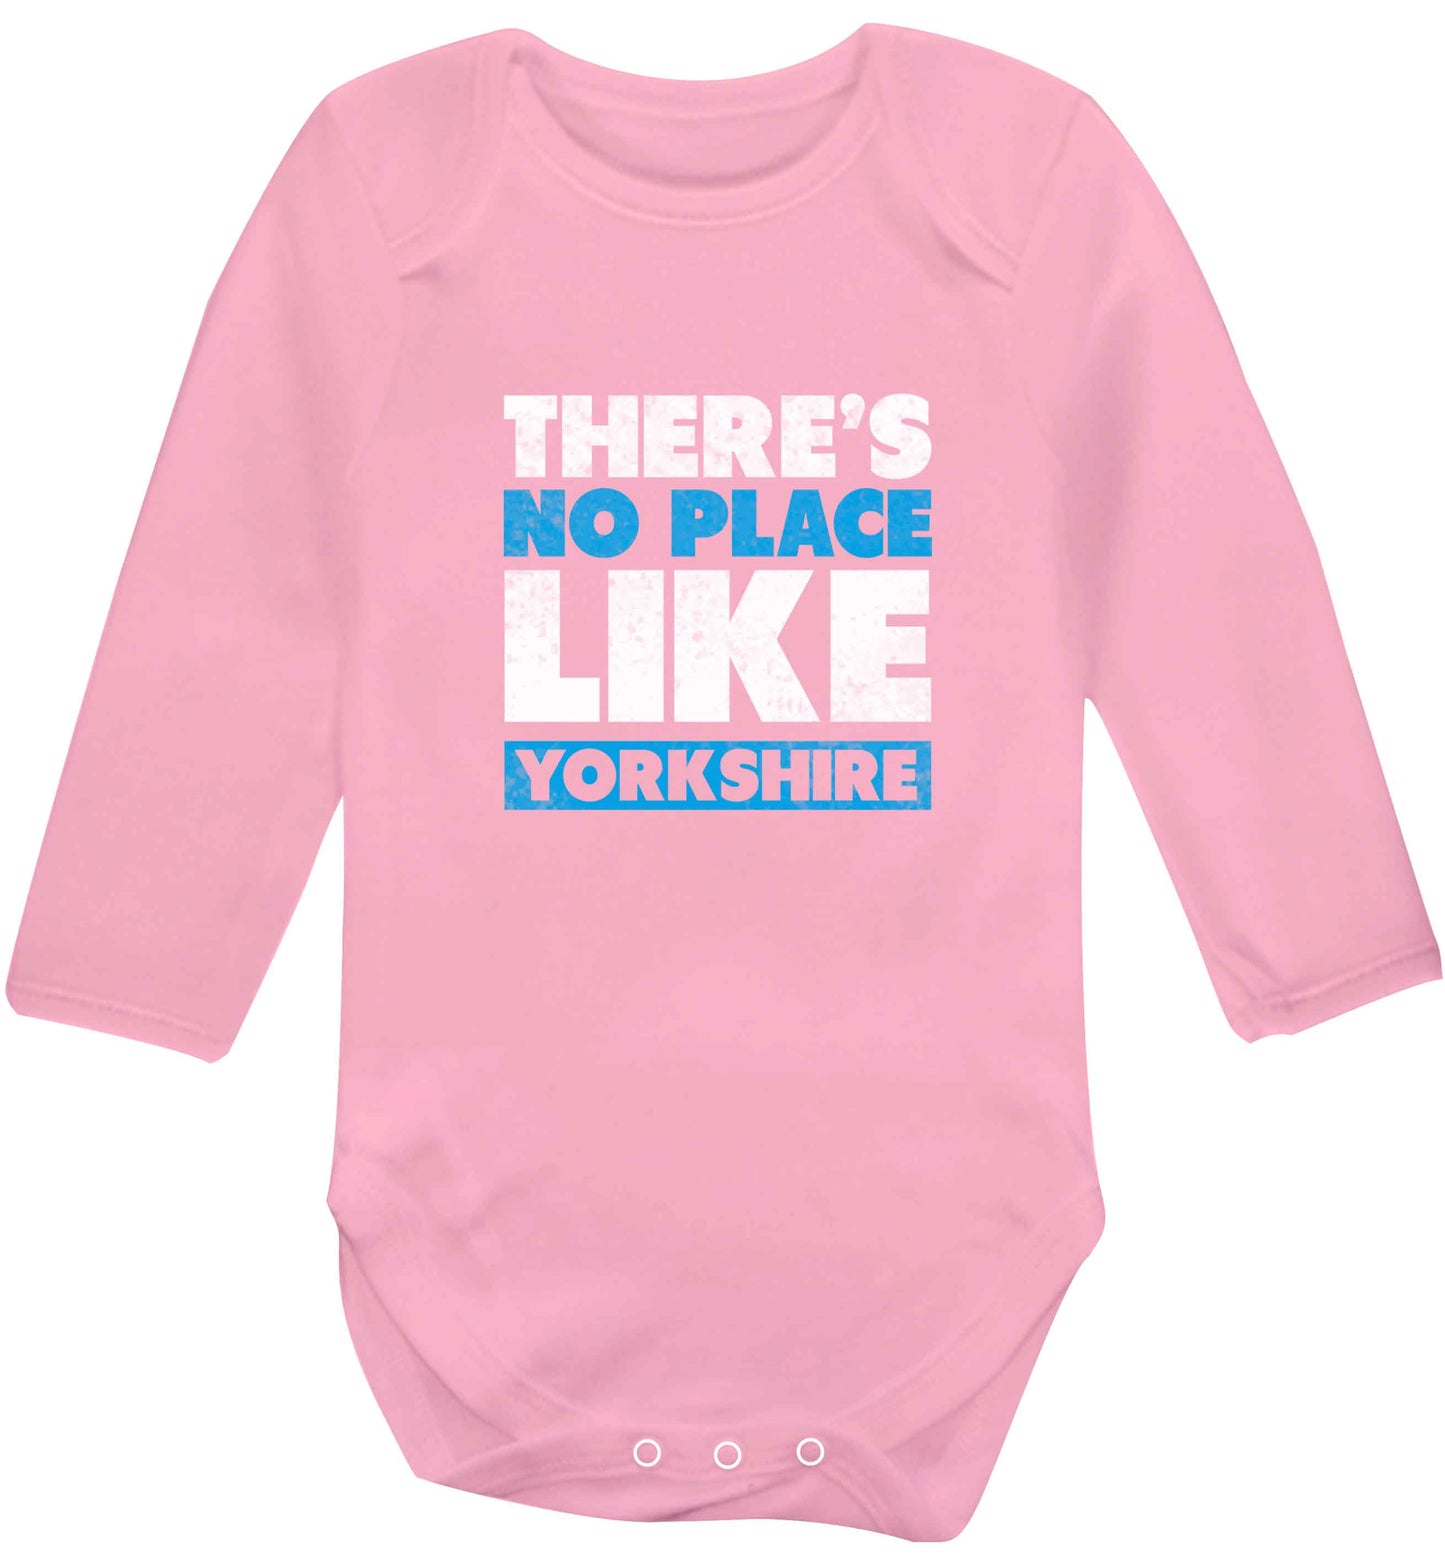 There's no place like Yorkshire baby vest long sleeved pale pink 6-12 months